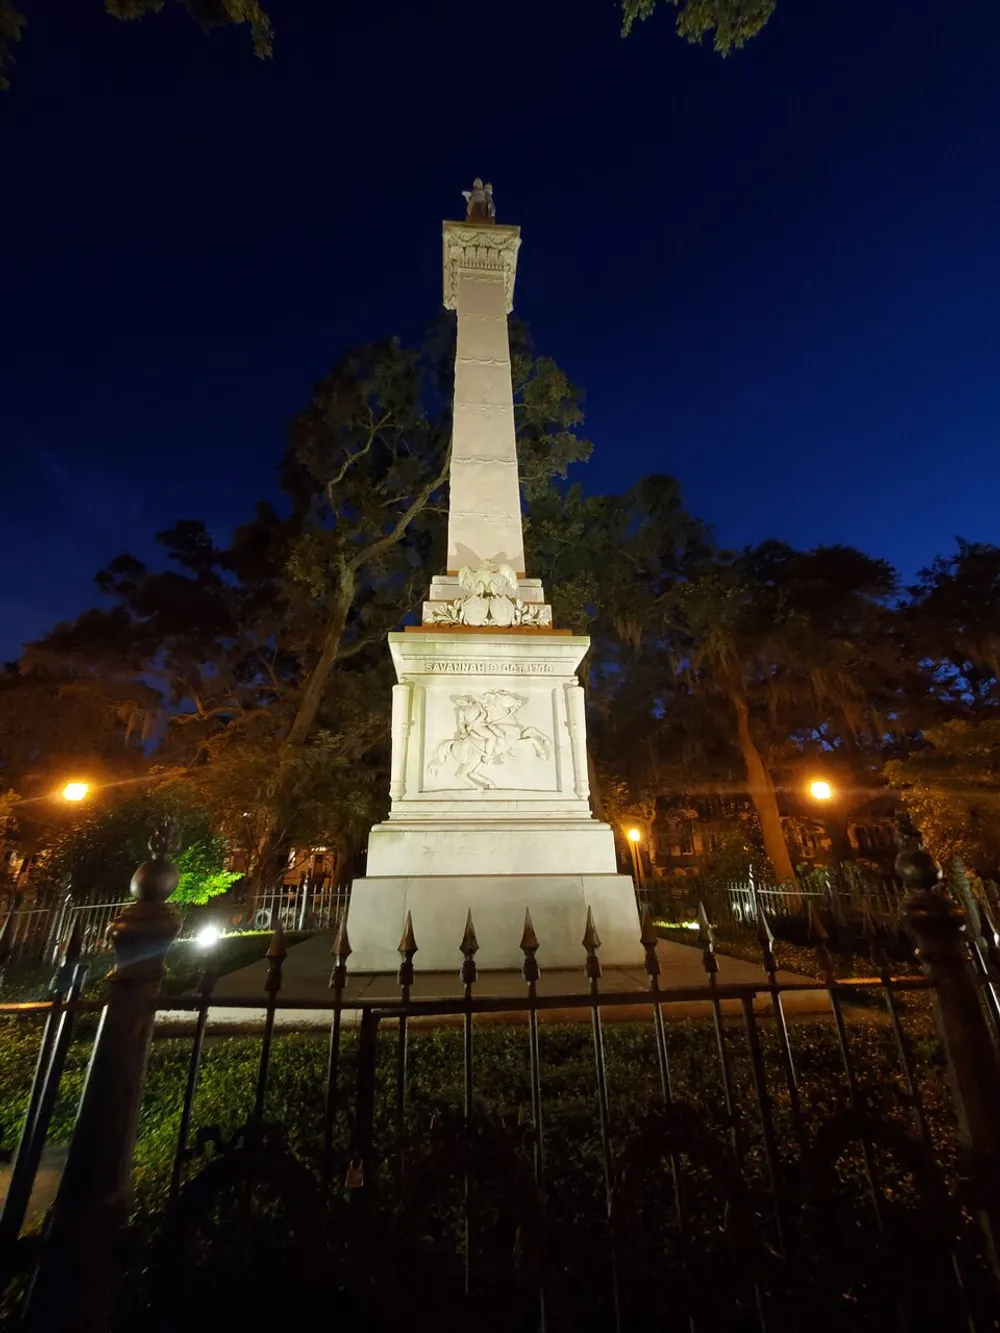 The image depicts a monument illuminated by artificial lighting against a dusky or night sky encircled by a wrought iron fence nestled amongst trees